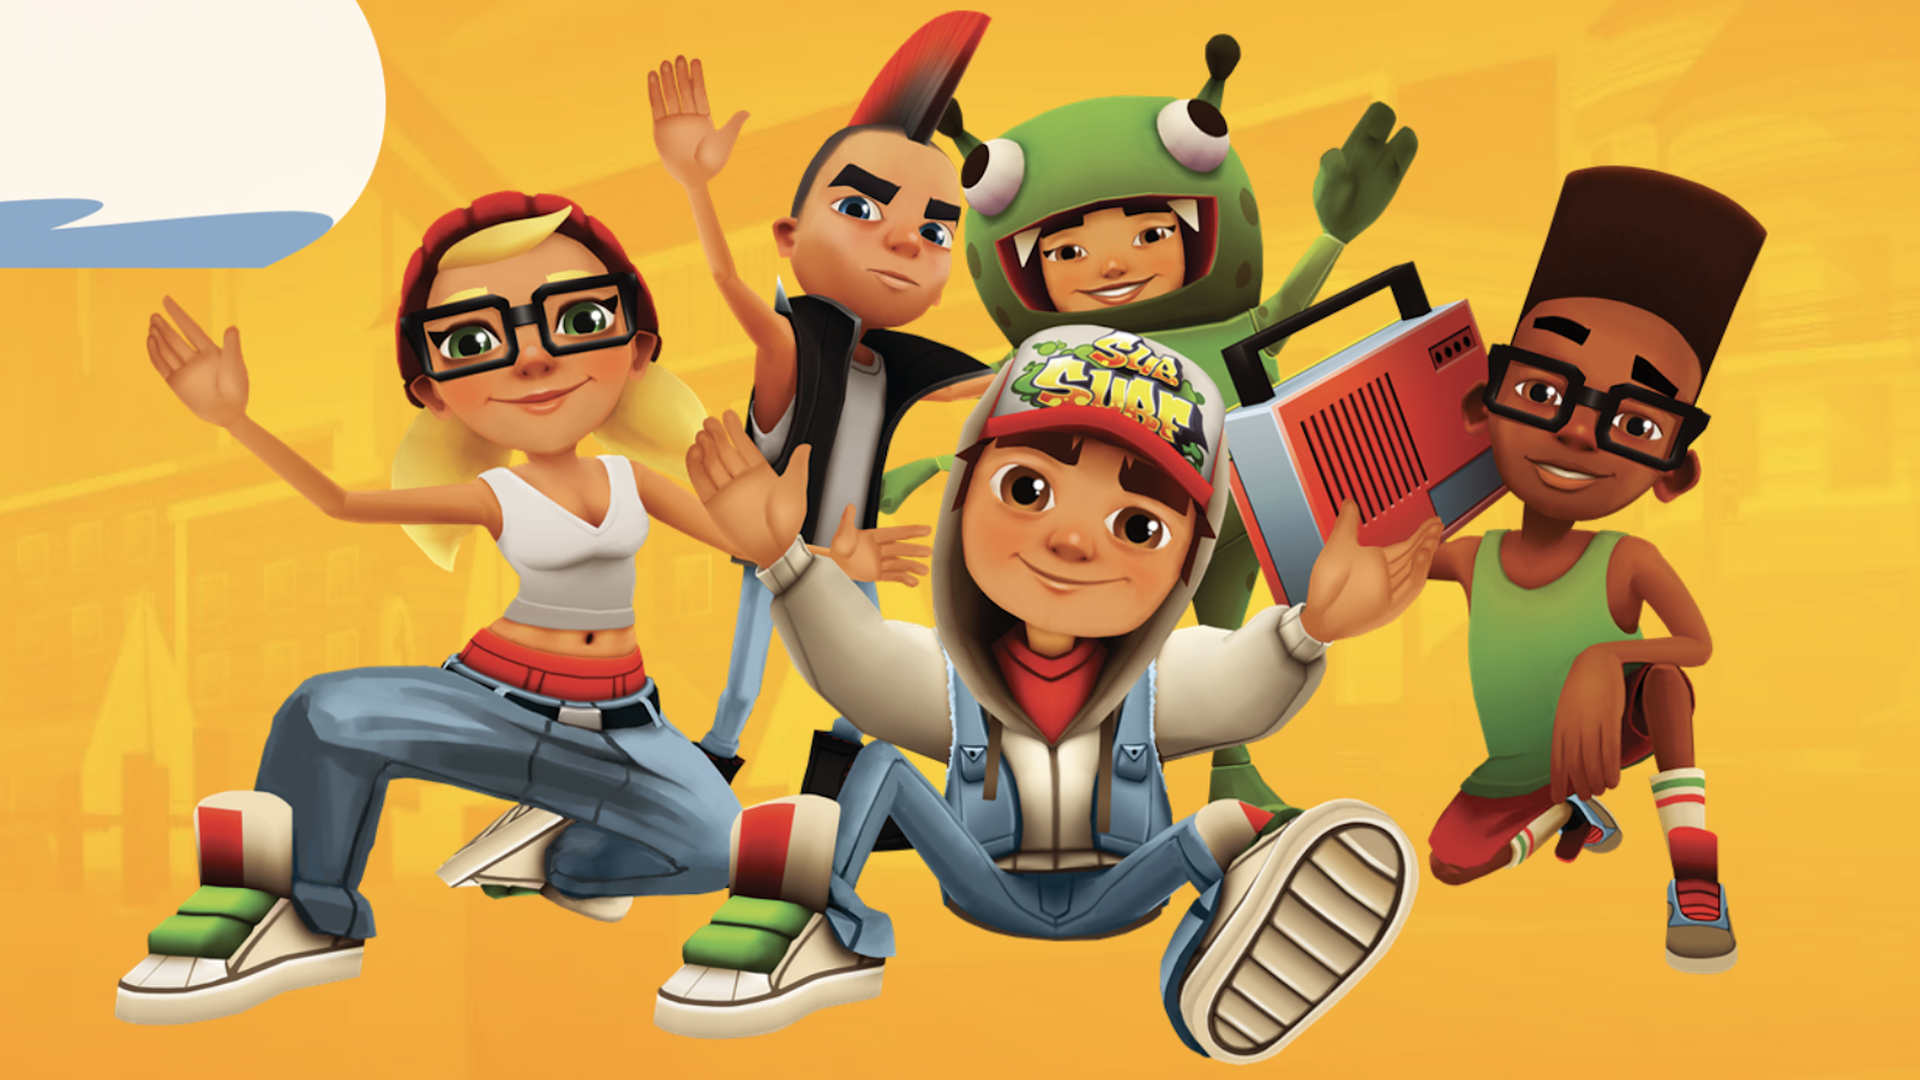 Group shot of young human video game characters waving